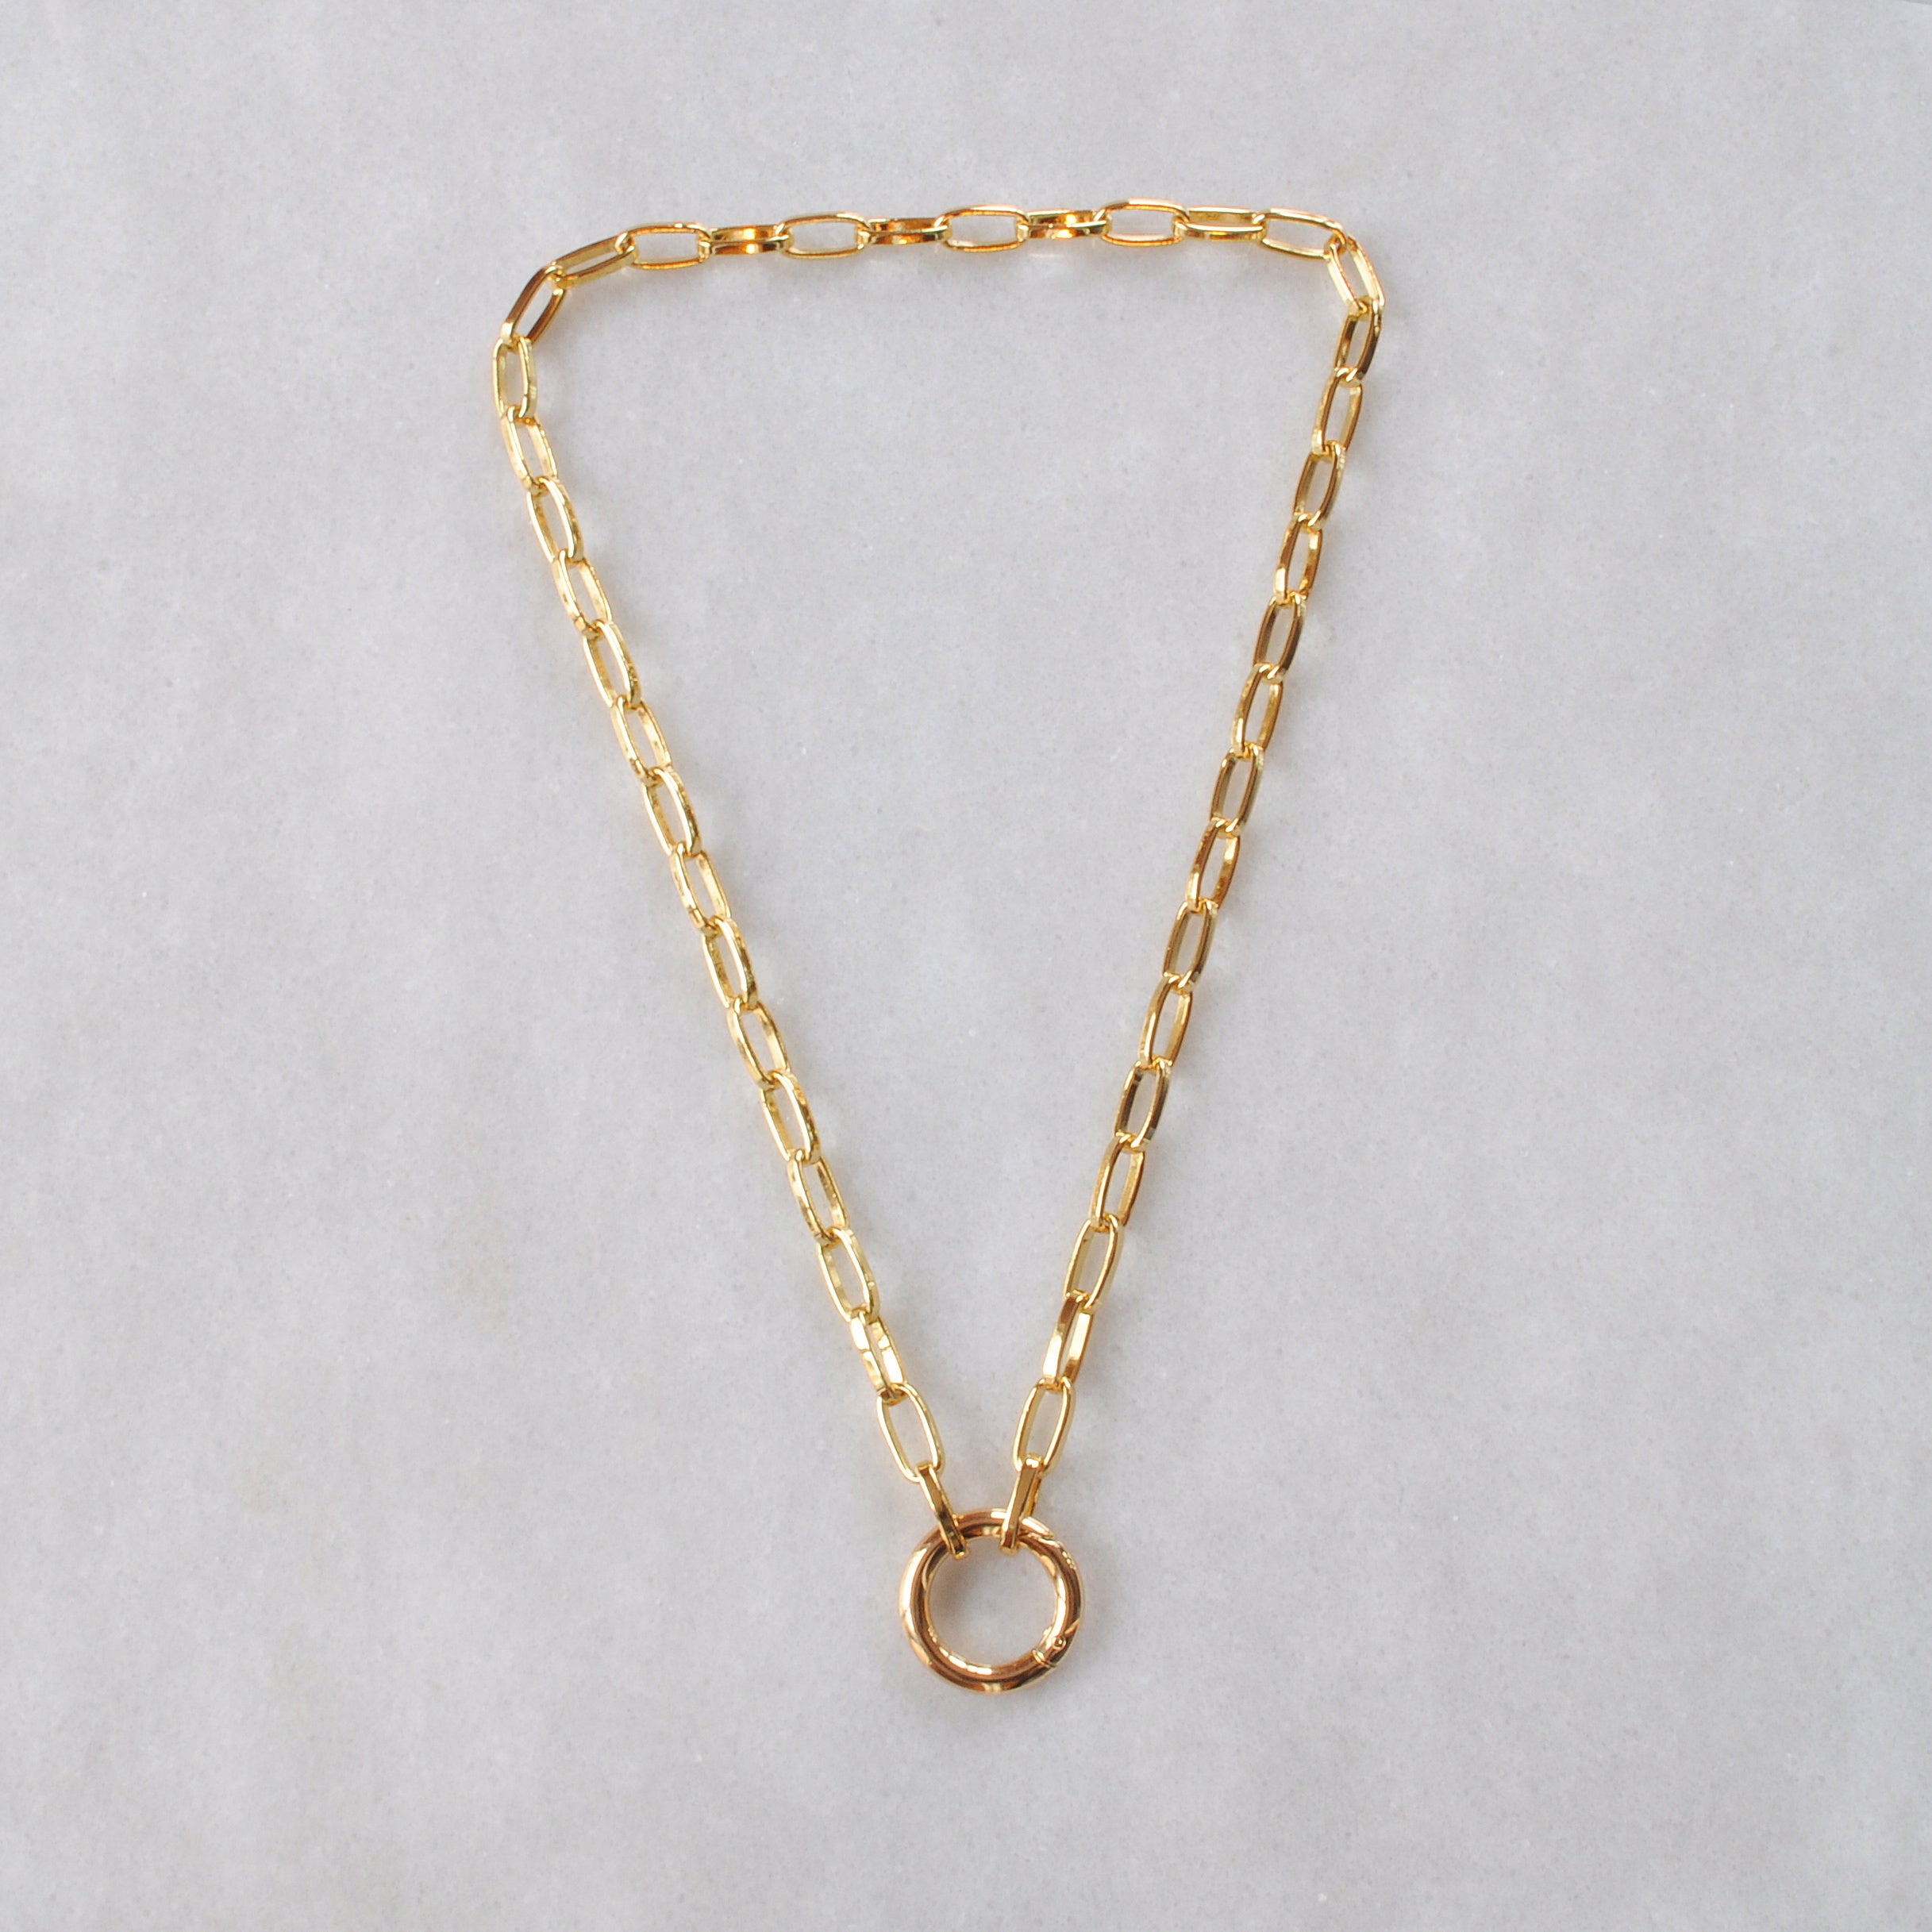 Gold Chain Link Round Clasp Necklace